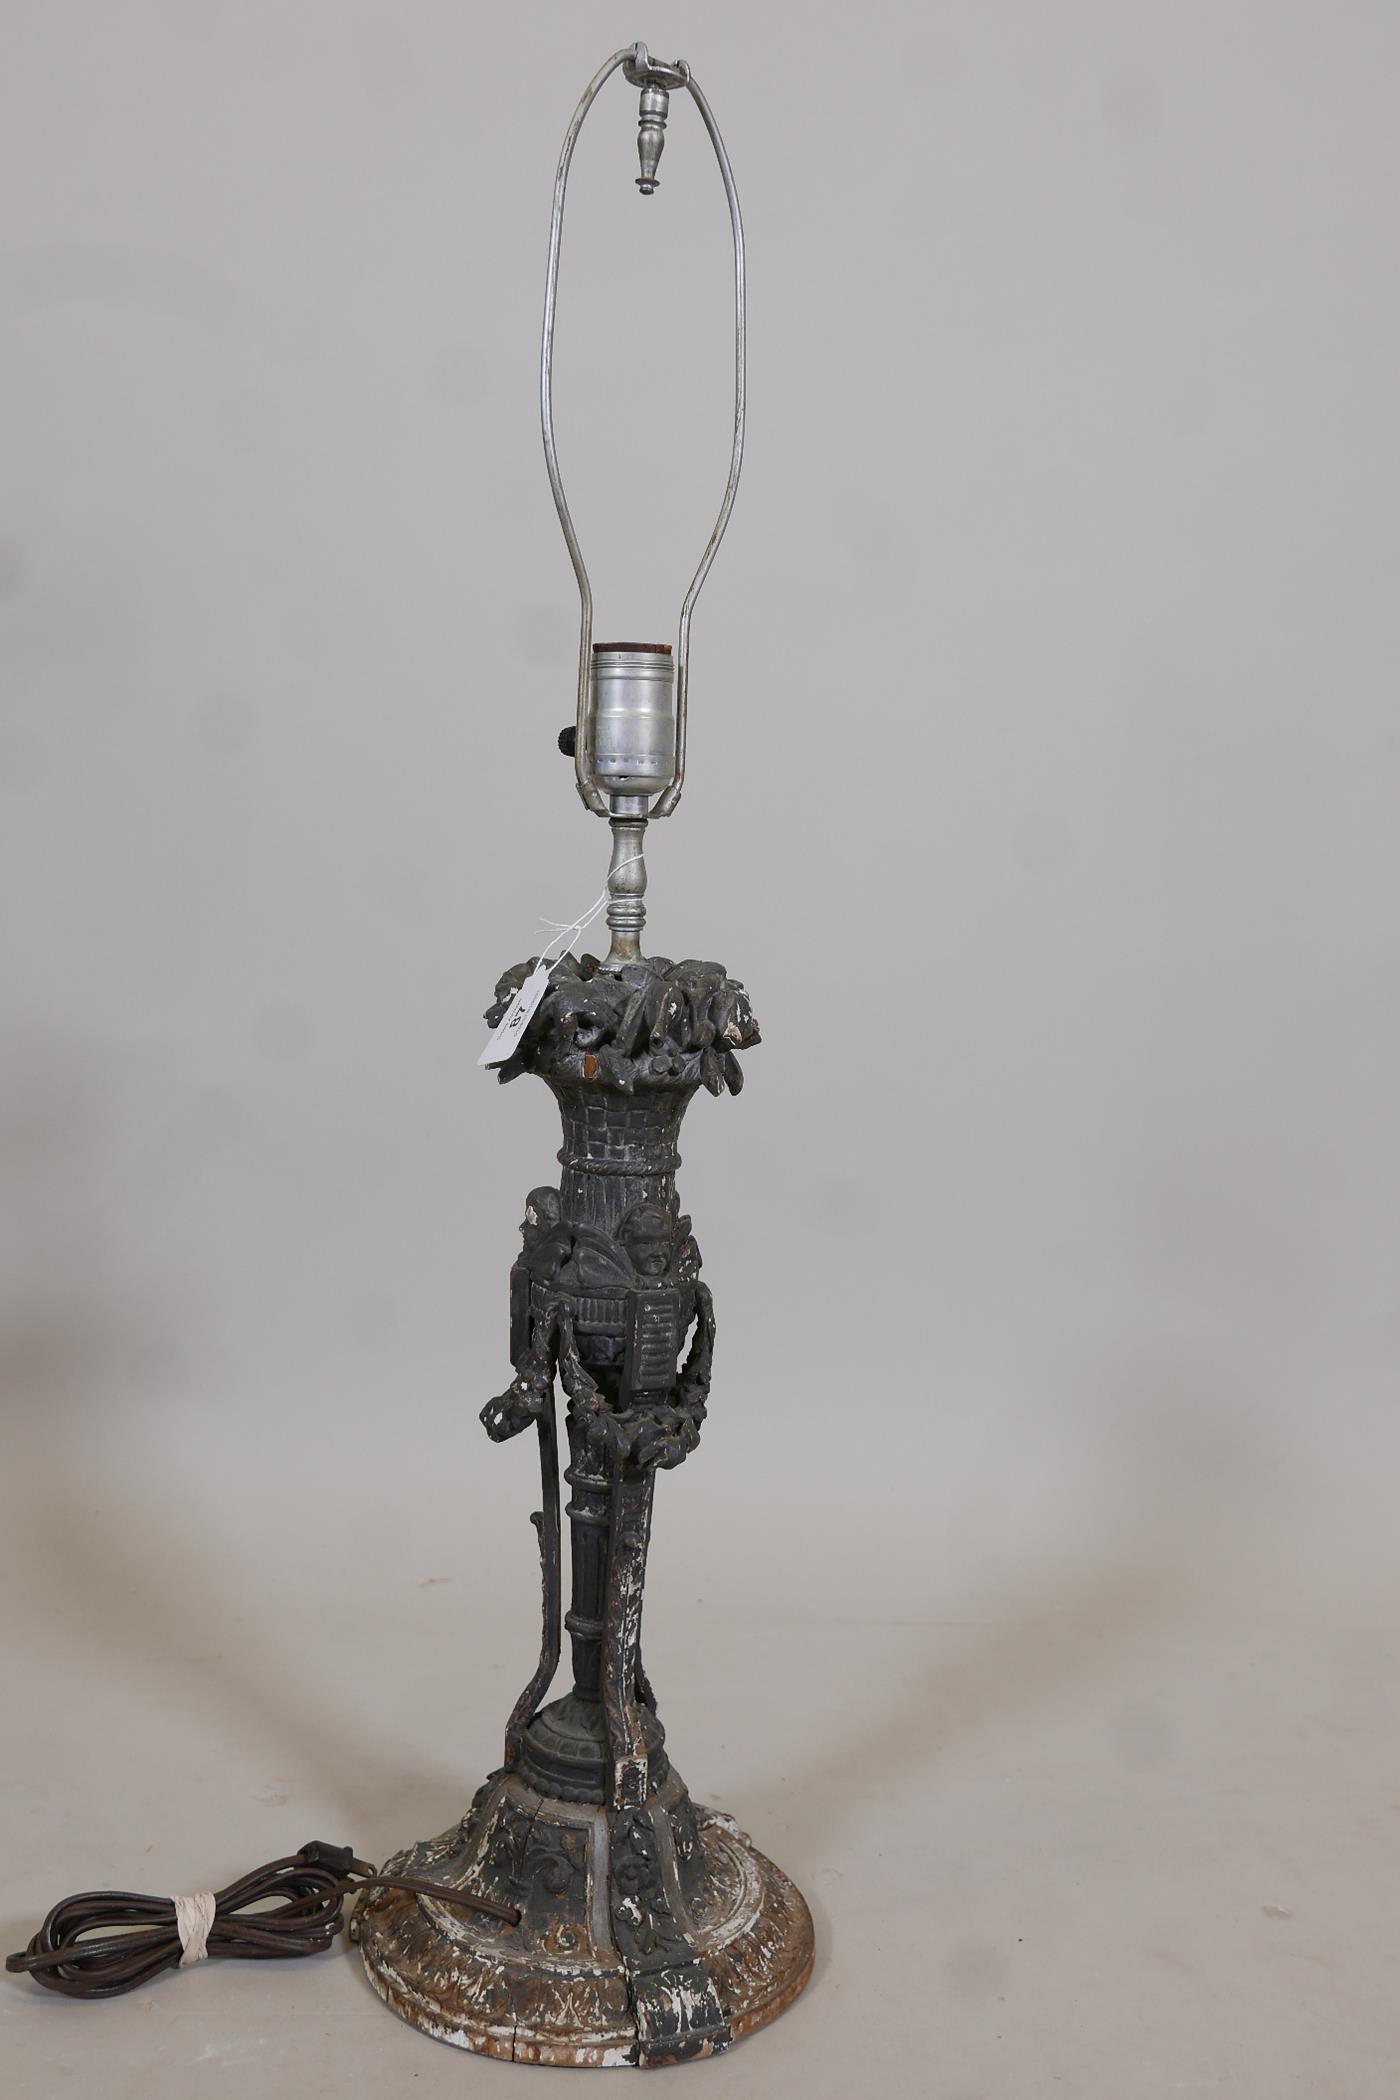 A C19th wood table lamp, well carved with floral swags and winged putti, drilled for electricity, - Image 4 of 4